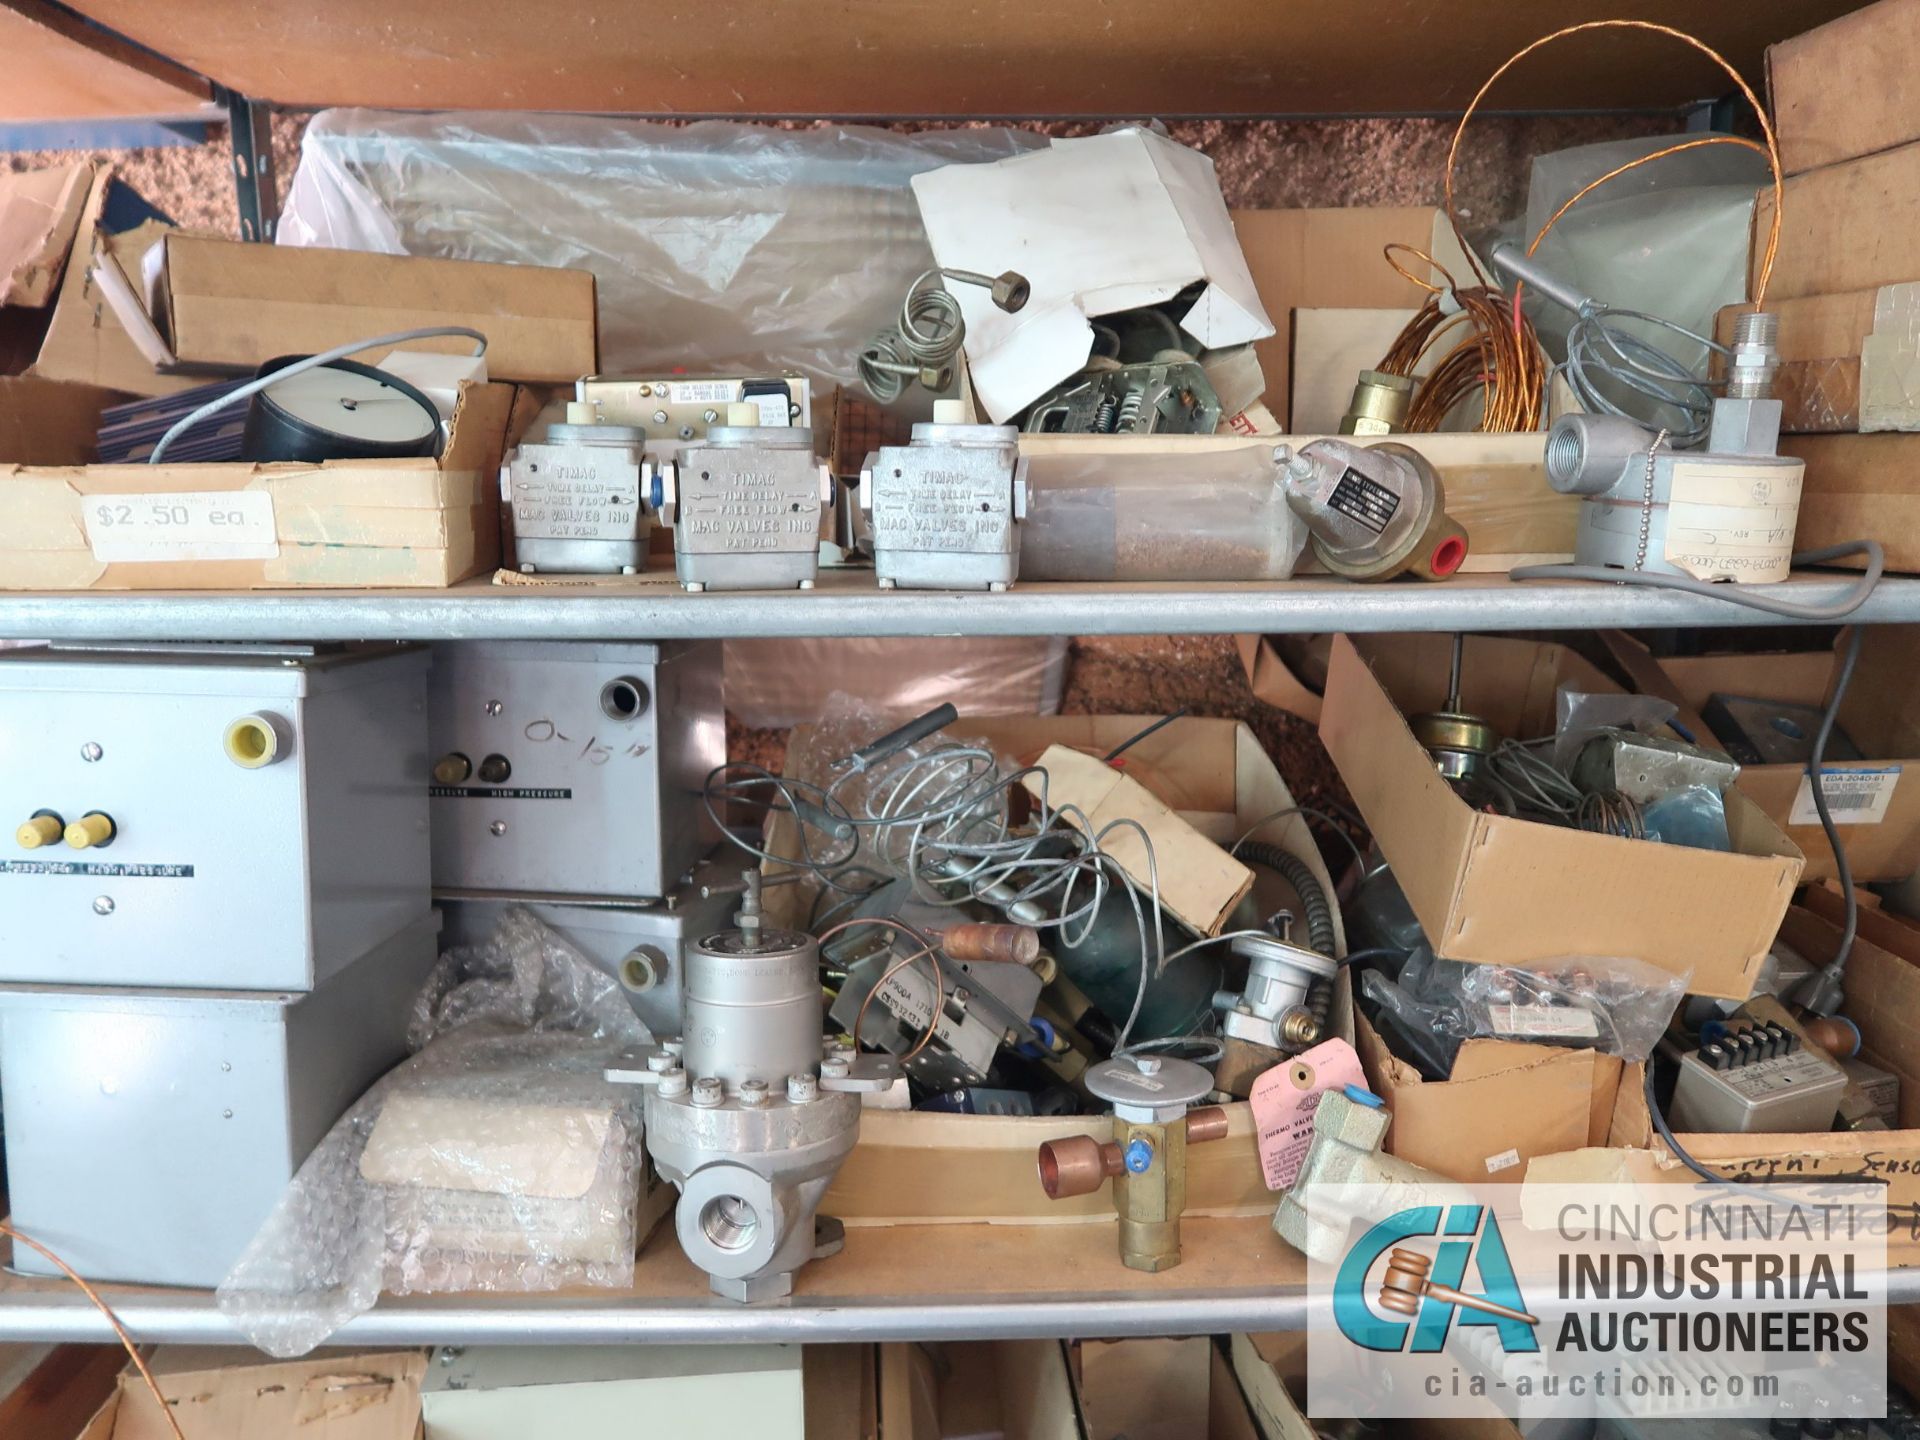 CONTENTS OF (16) SHELVES INCLUDING MISCELLANEOUS VALVES, THERMOSTATS, ANALYZERS, ELECTRICAL, CONTROL - Image 39 of 47